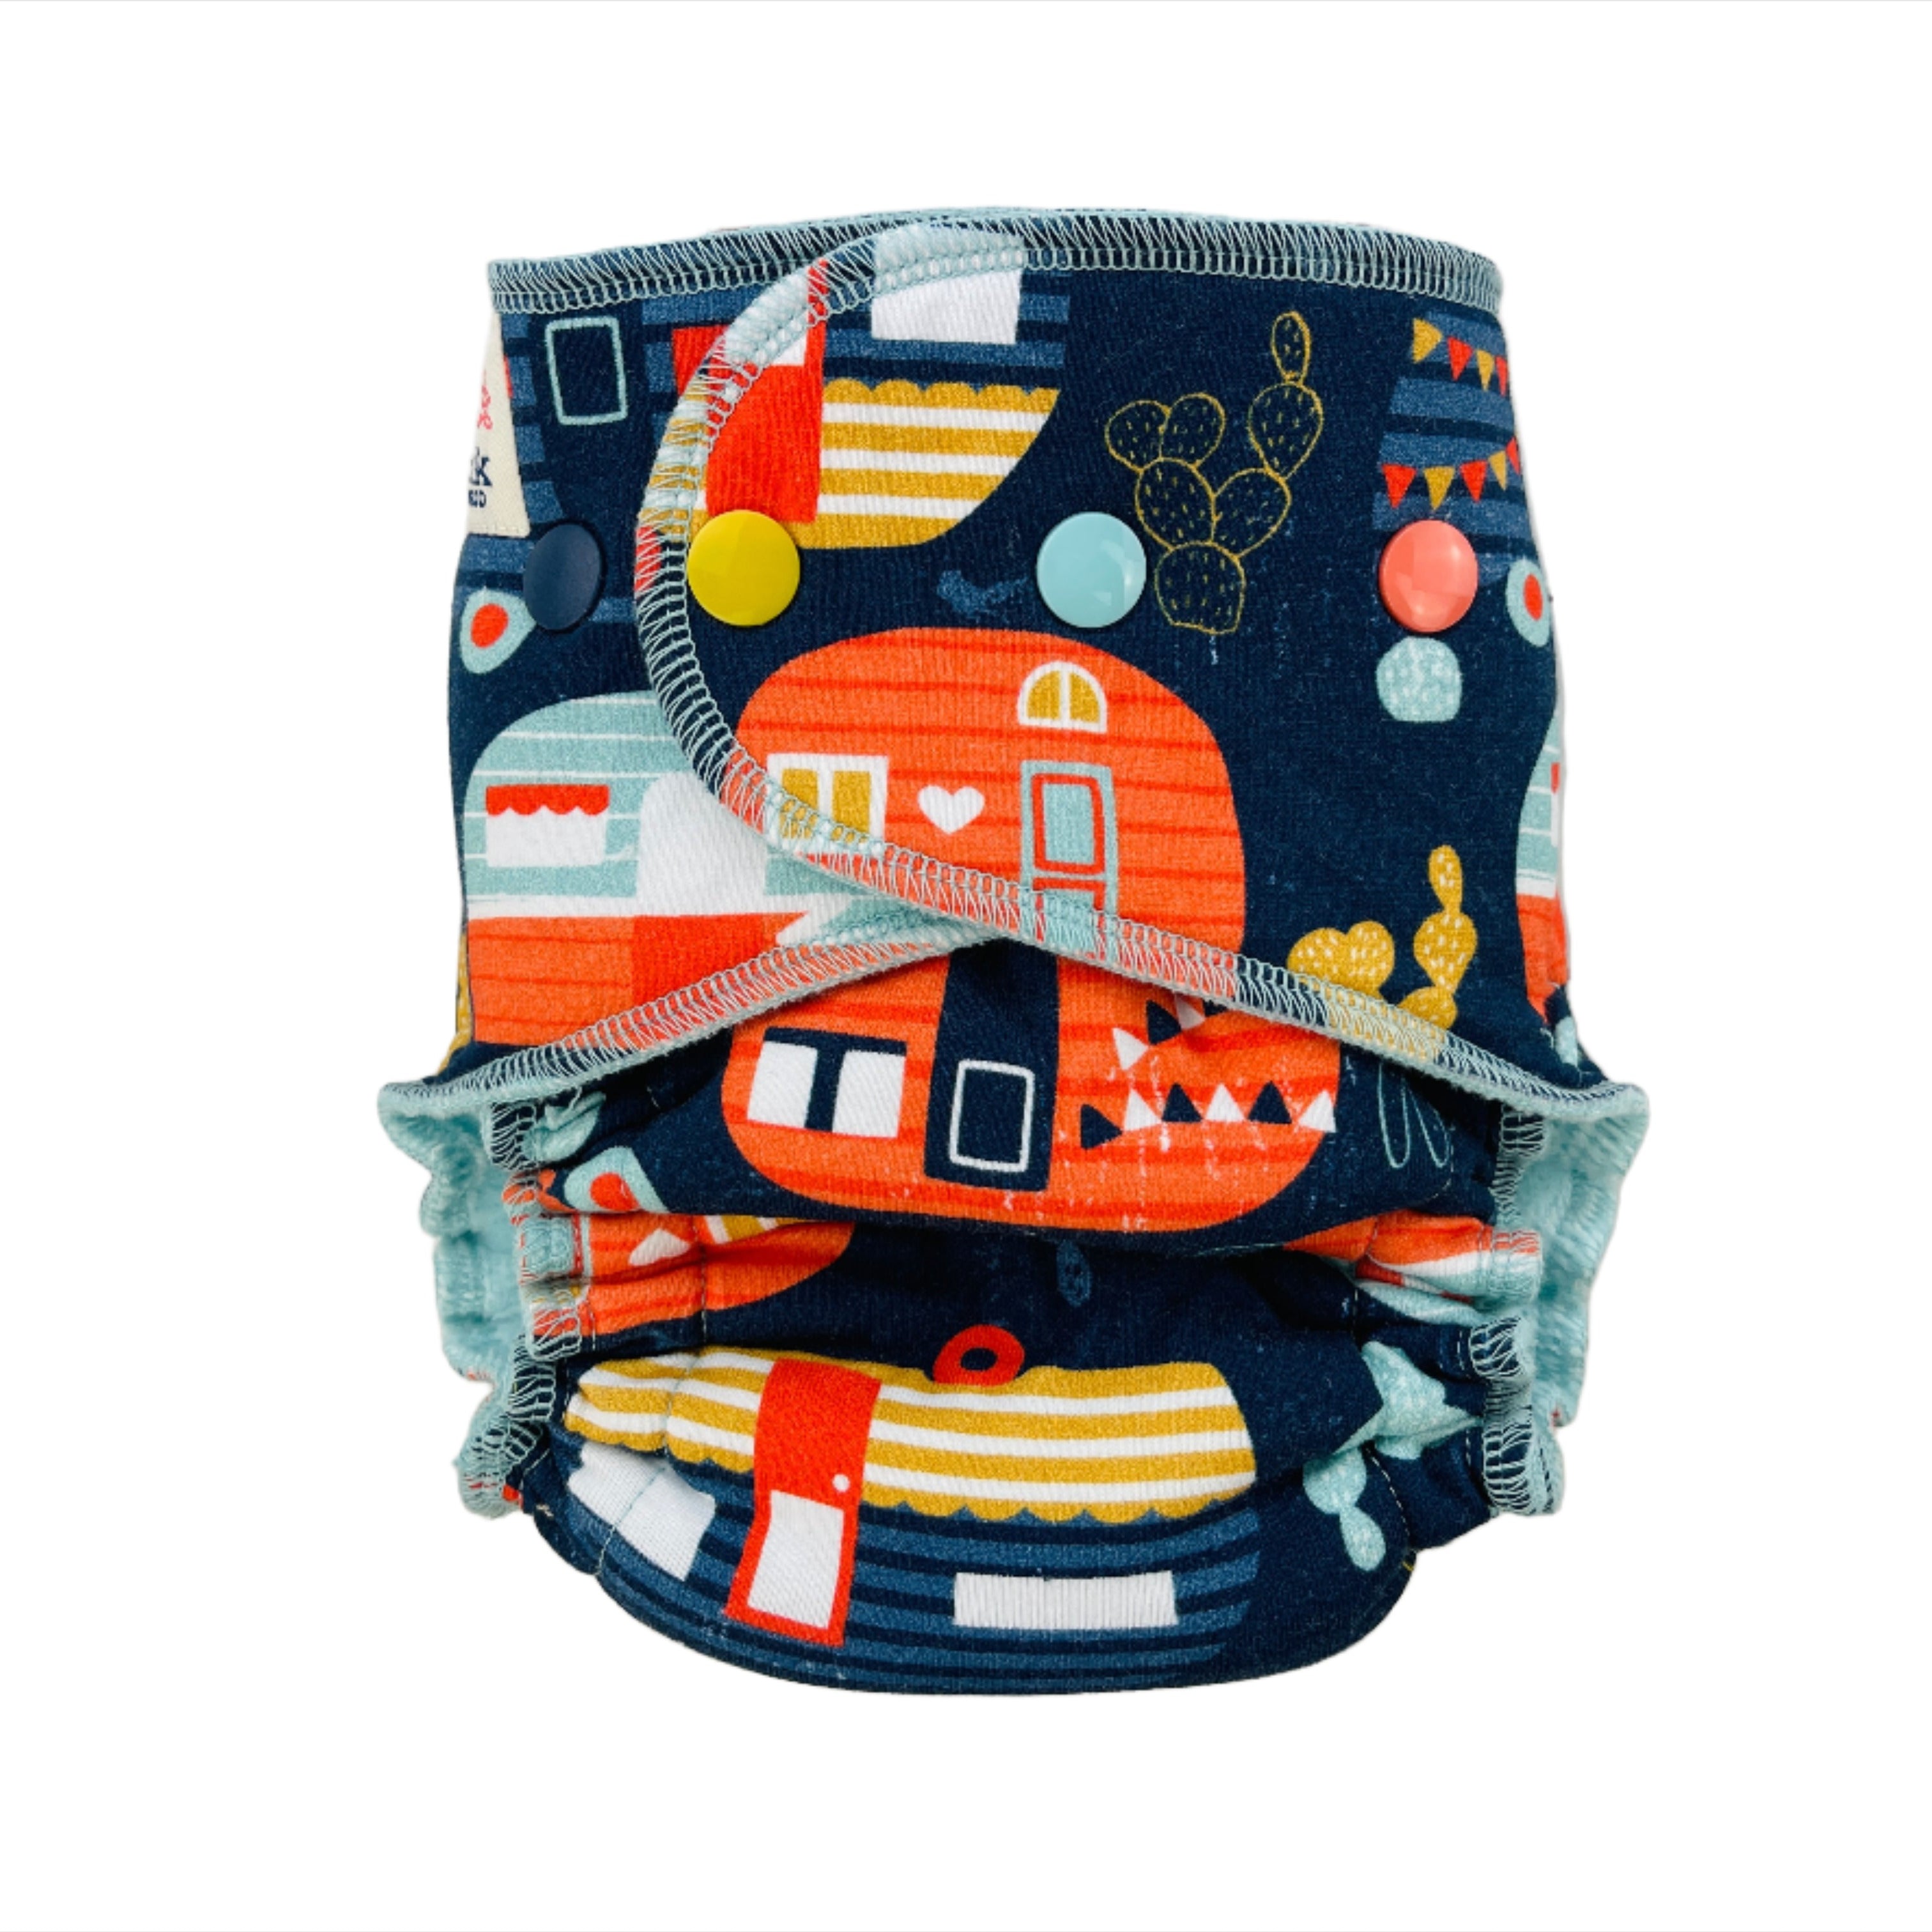 Lilly & Frank Fitted Cloth Diaper Sunset Campers Petite Hybrid Cloth Diaper - Hybrid - Classic Serged